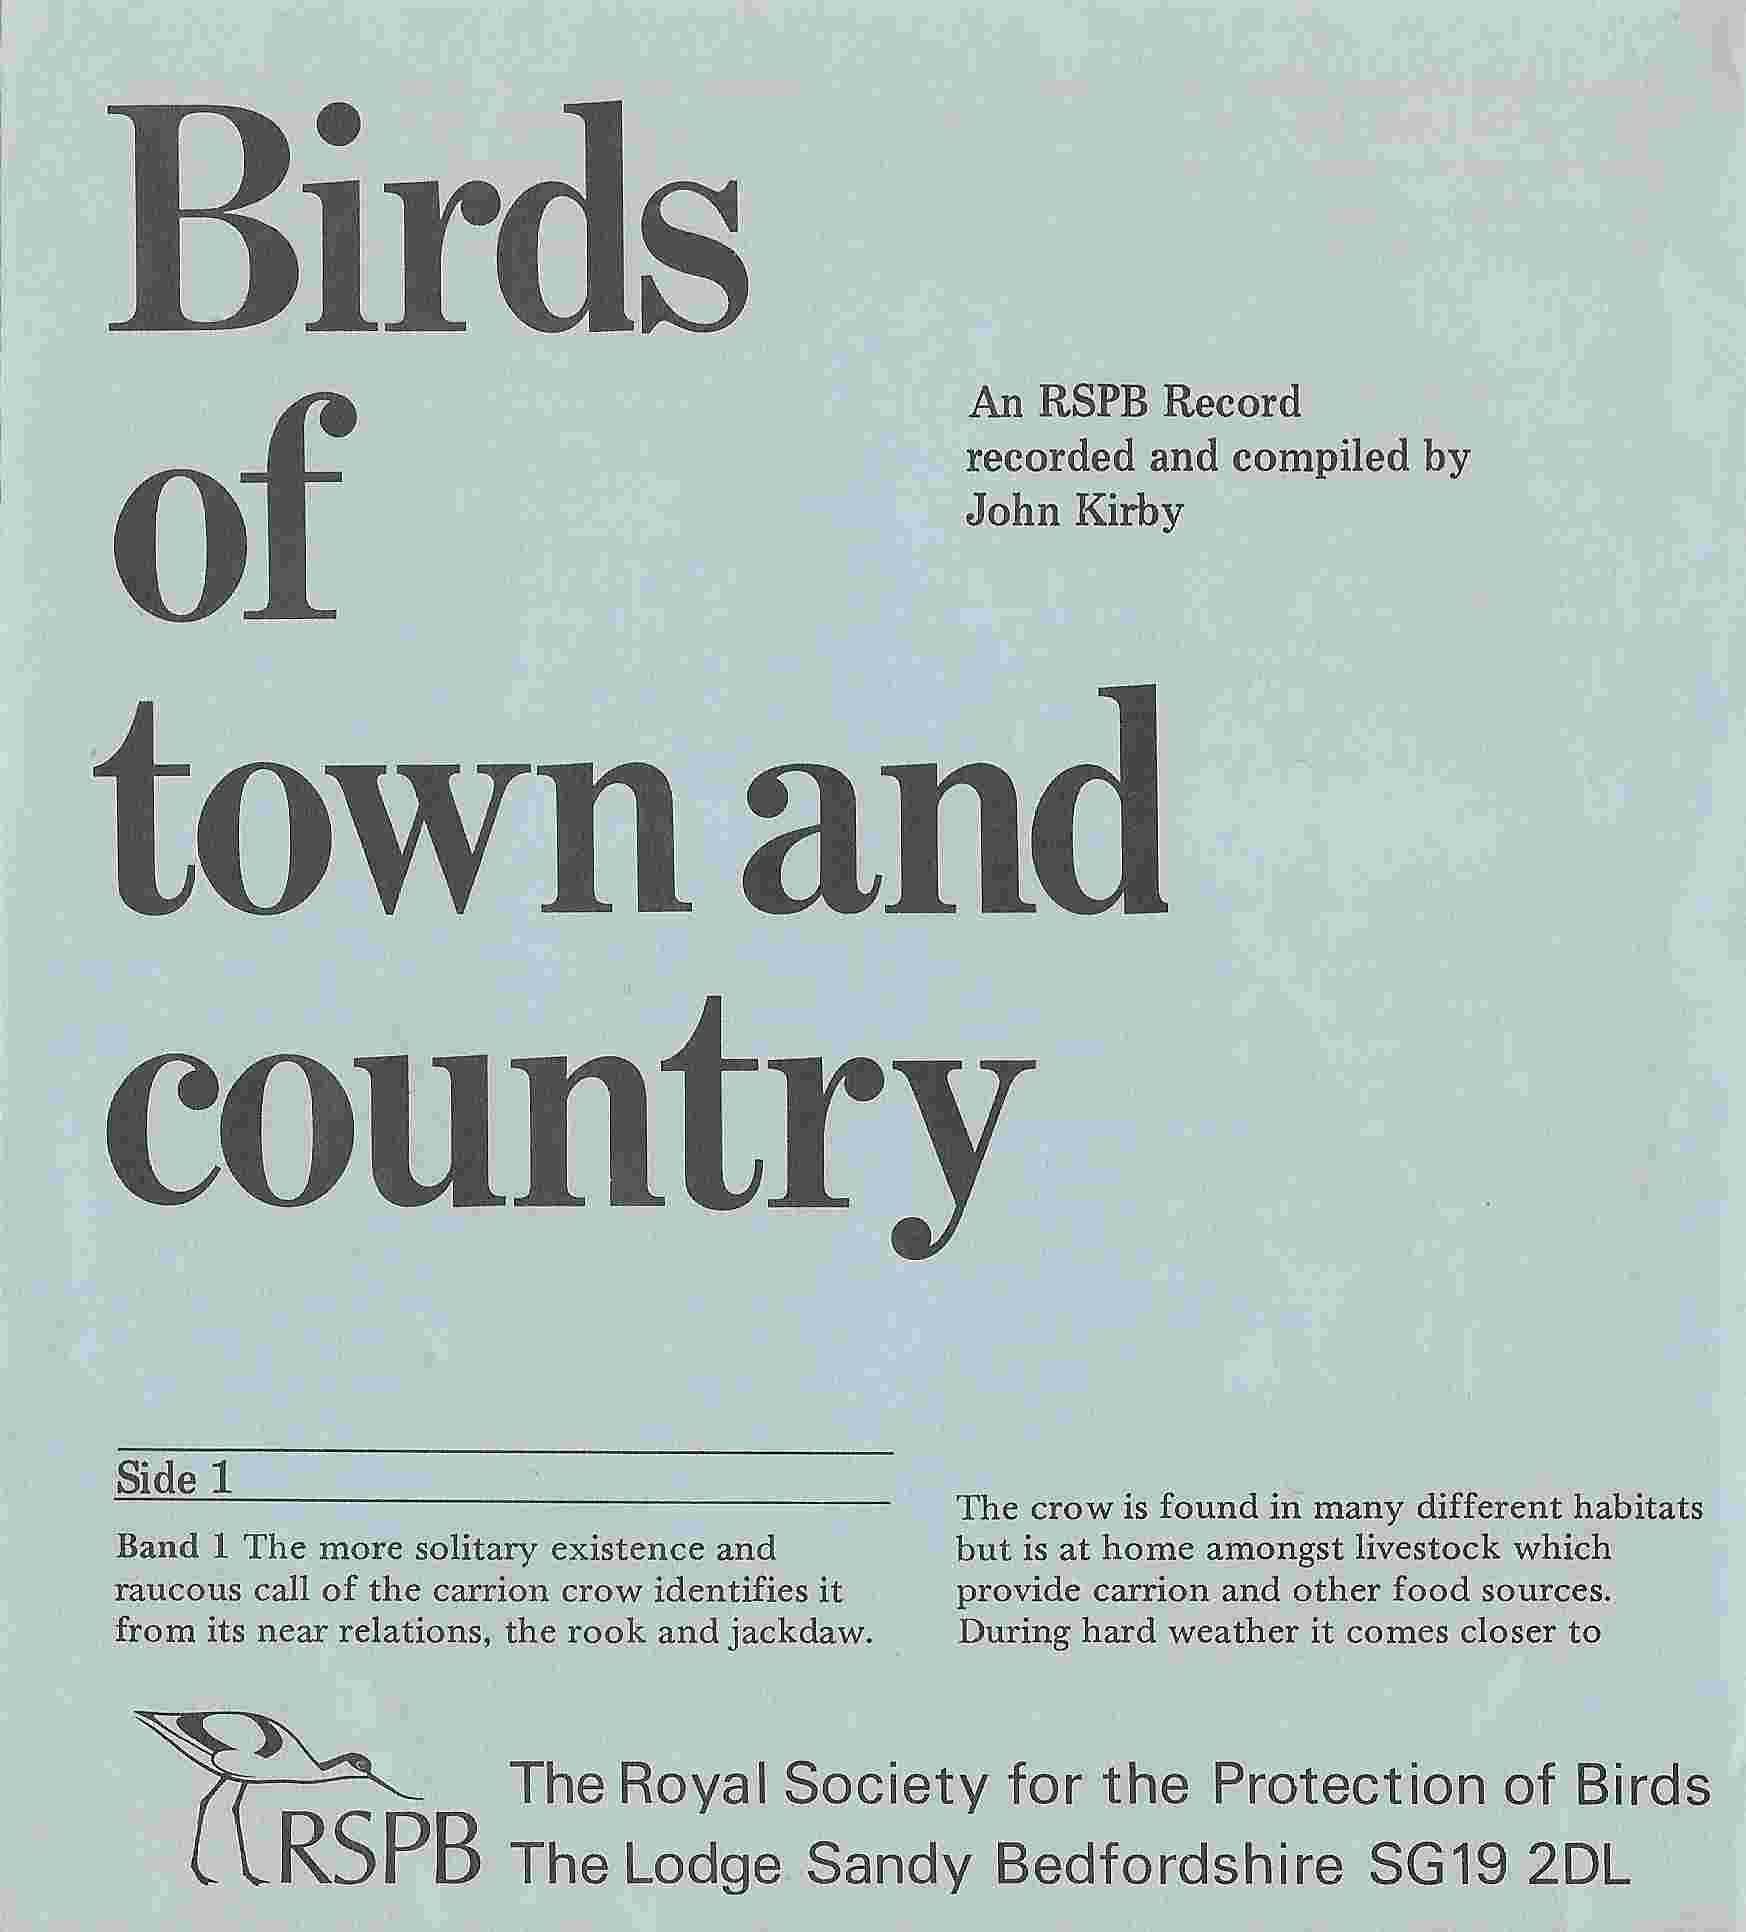 Picture of SFI 304 Birds of town & country by artist John Kirby from ITV, Channel 4 and Channel 5 library